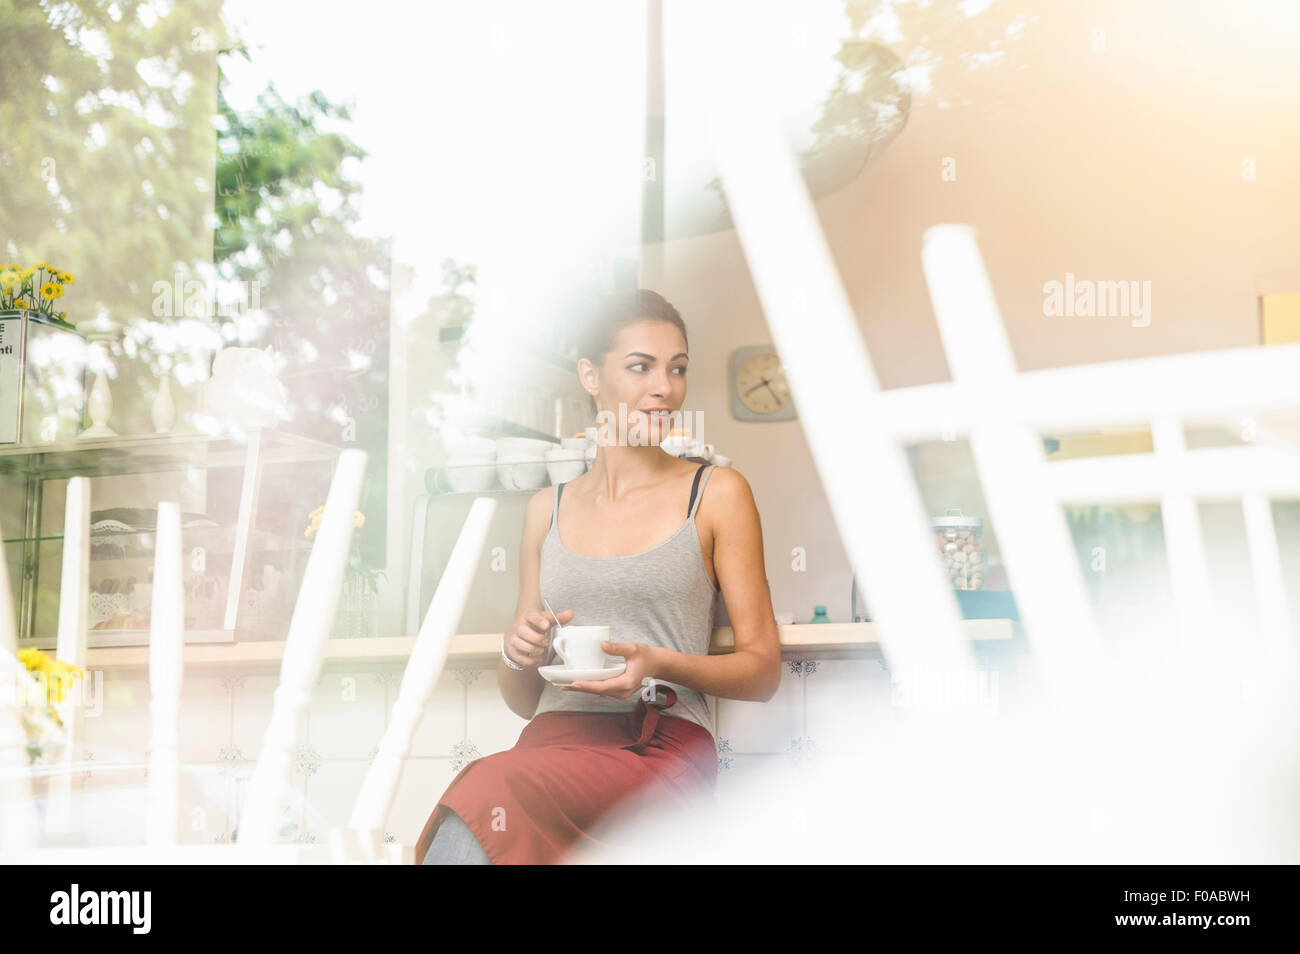 Young waitress sitting in cafe, view through window Stock Photo